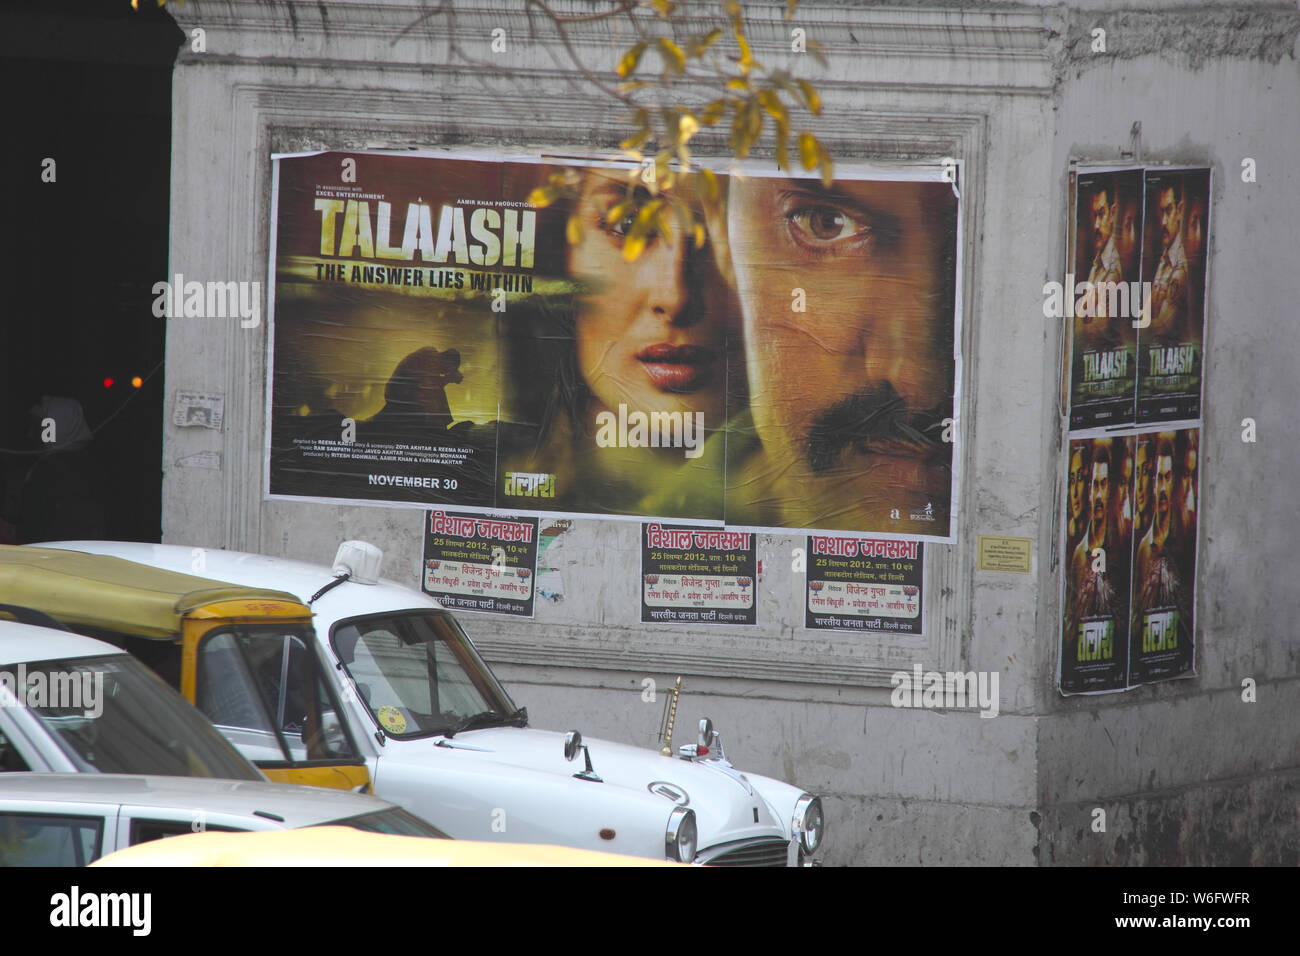 Talaash movie poster mounted on wall, India Stock Photo